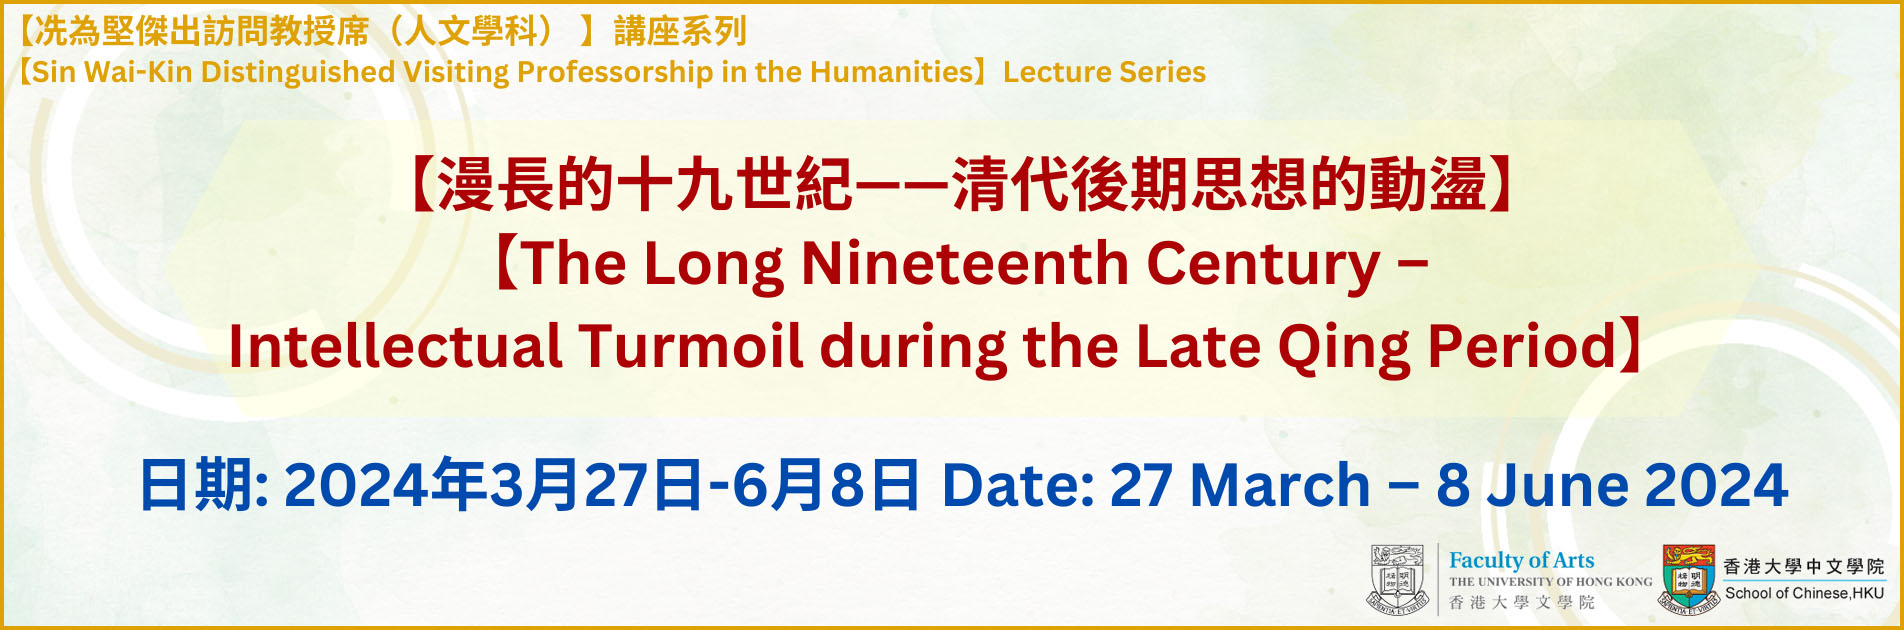 1904x630-rolling-banner-wangfs-lecture-series-202404231632